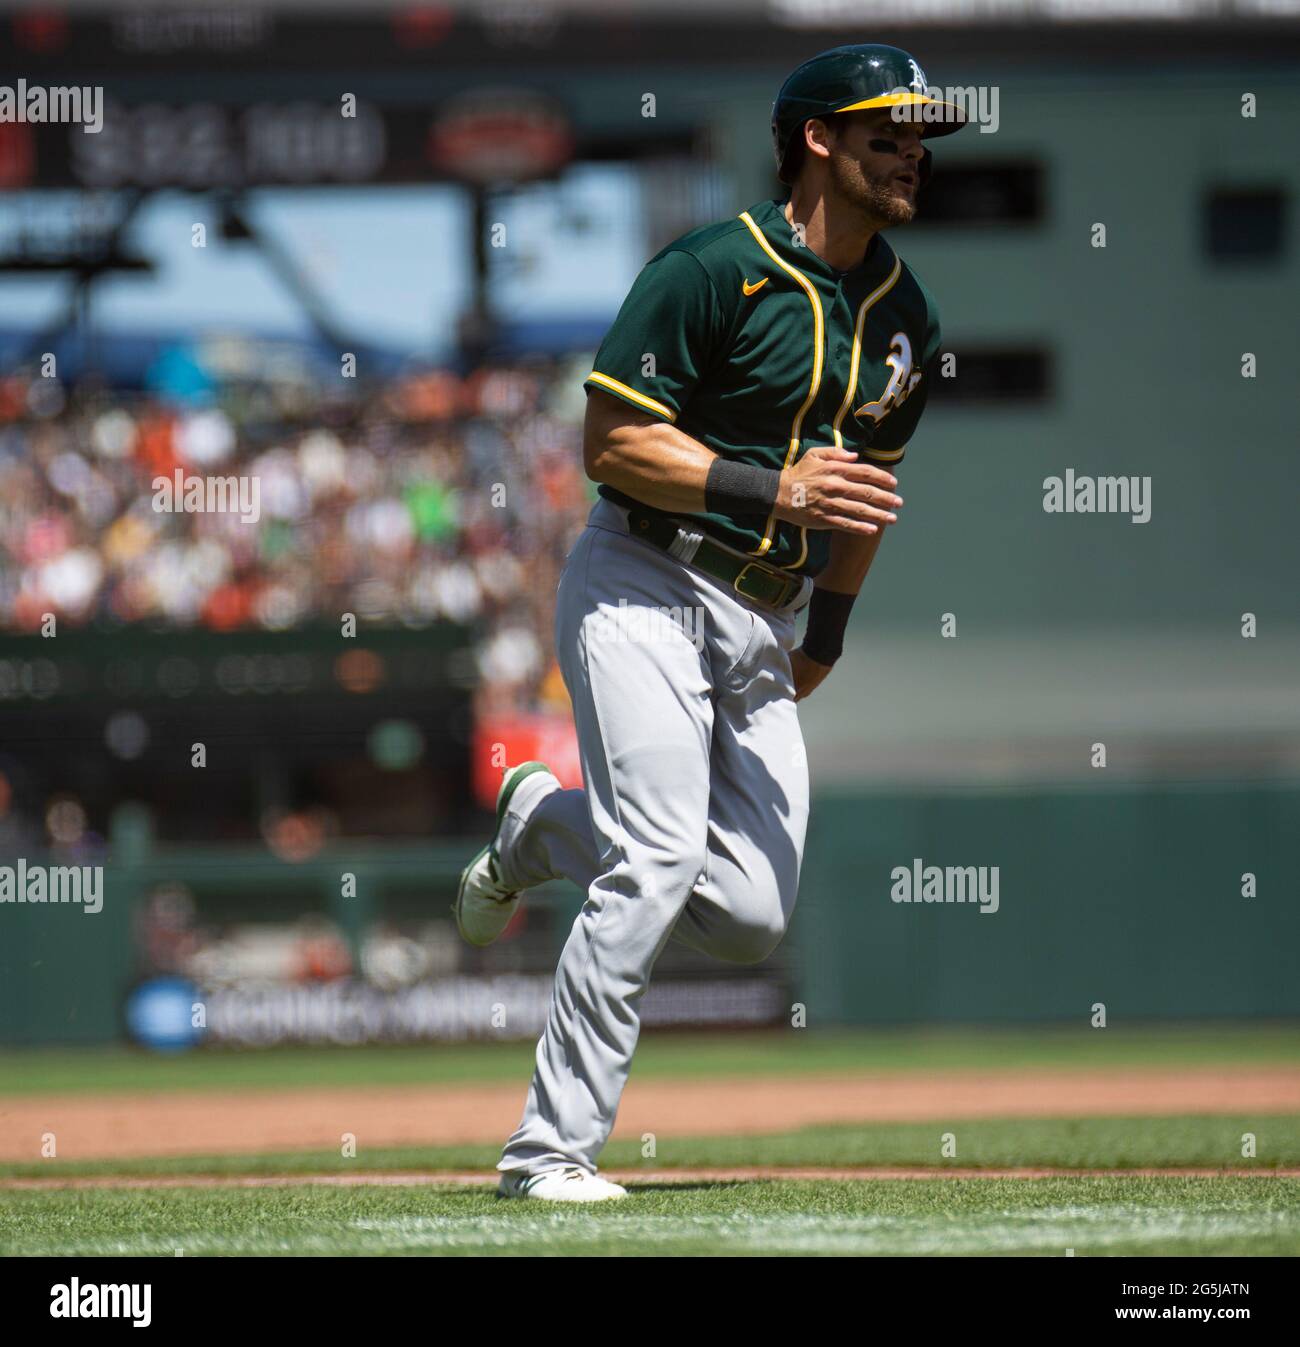 June 27 2021 San Francisco CA, U.S.A. Oakland Athletics third baseman Chad  Pinder (4) rounds 3rd base coming into home during the MLB game between the Oakland  Athletics and the San Francisco